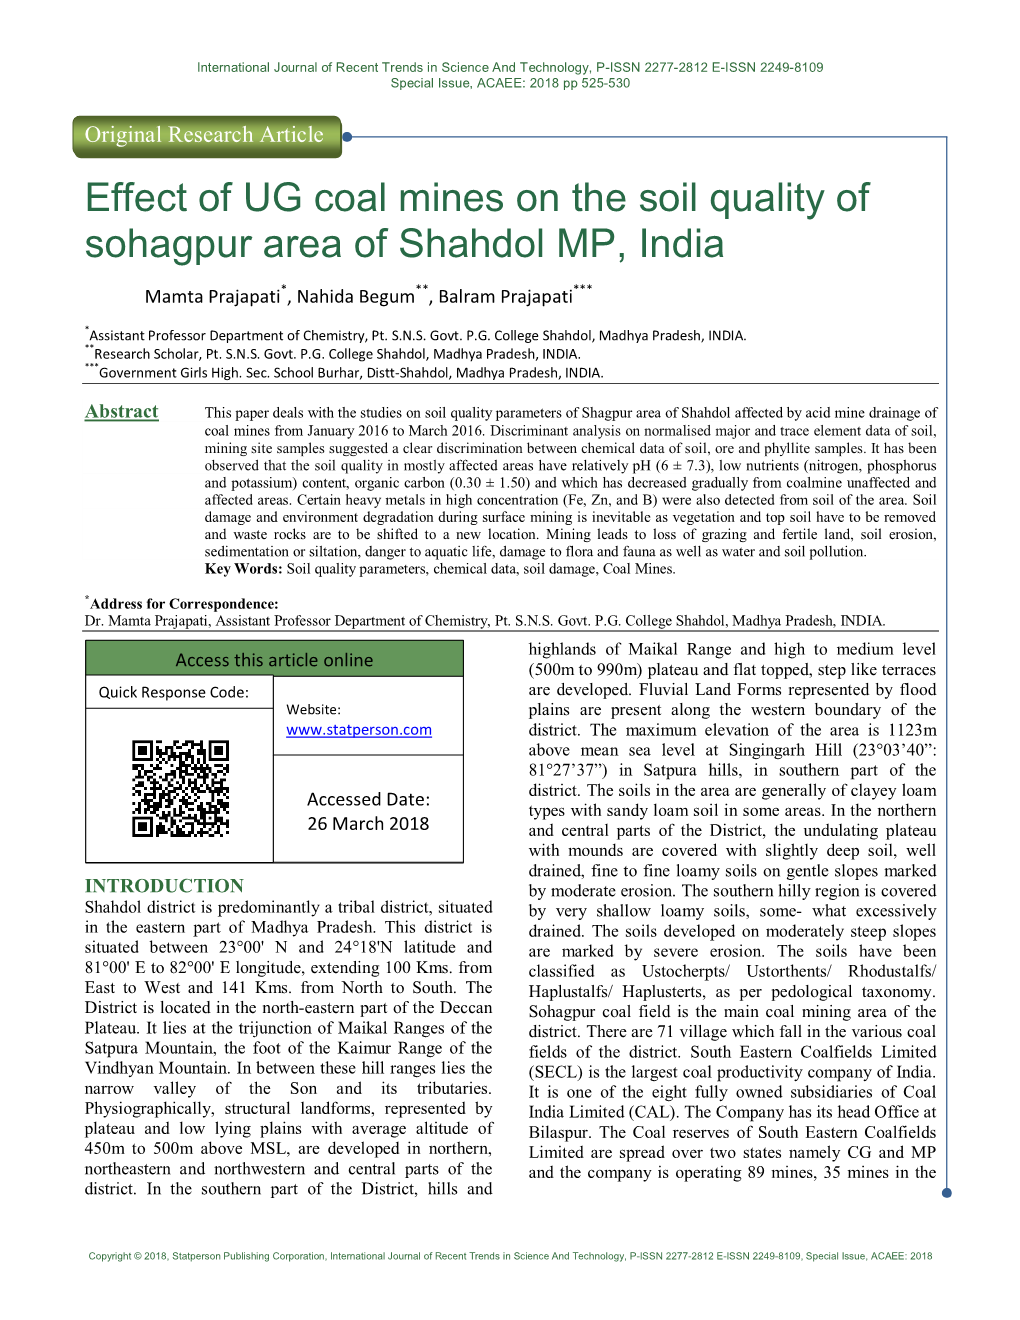 Effect of UG Coal Mines on the Soil Quality of Sohagpur Area of Shahdol MP, India